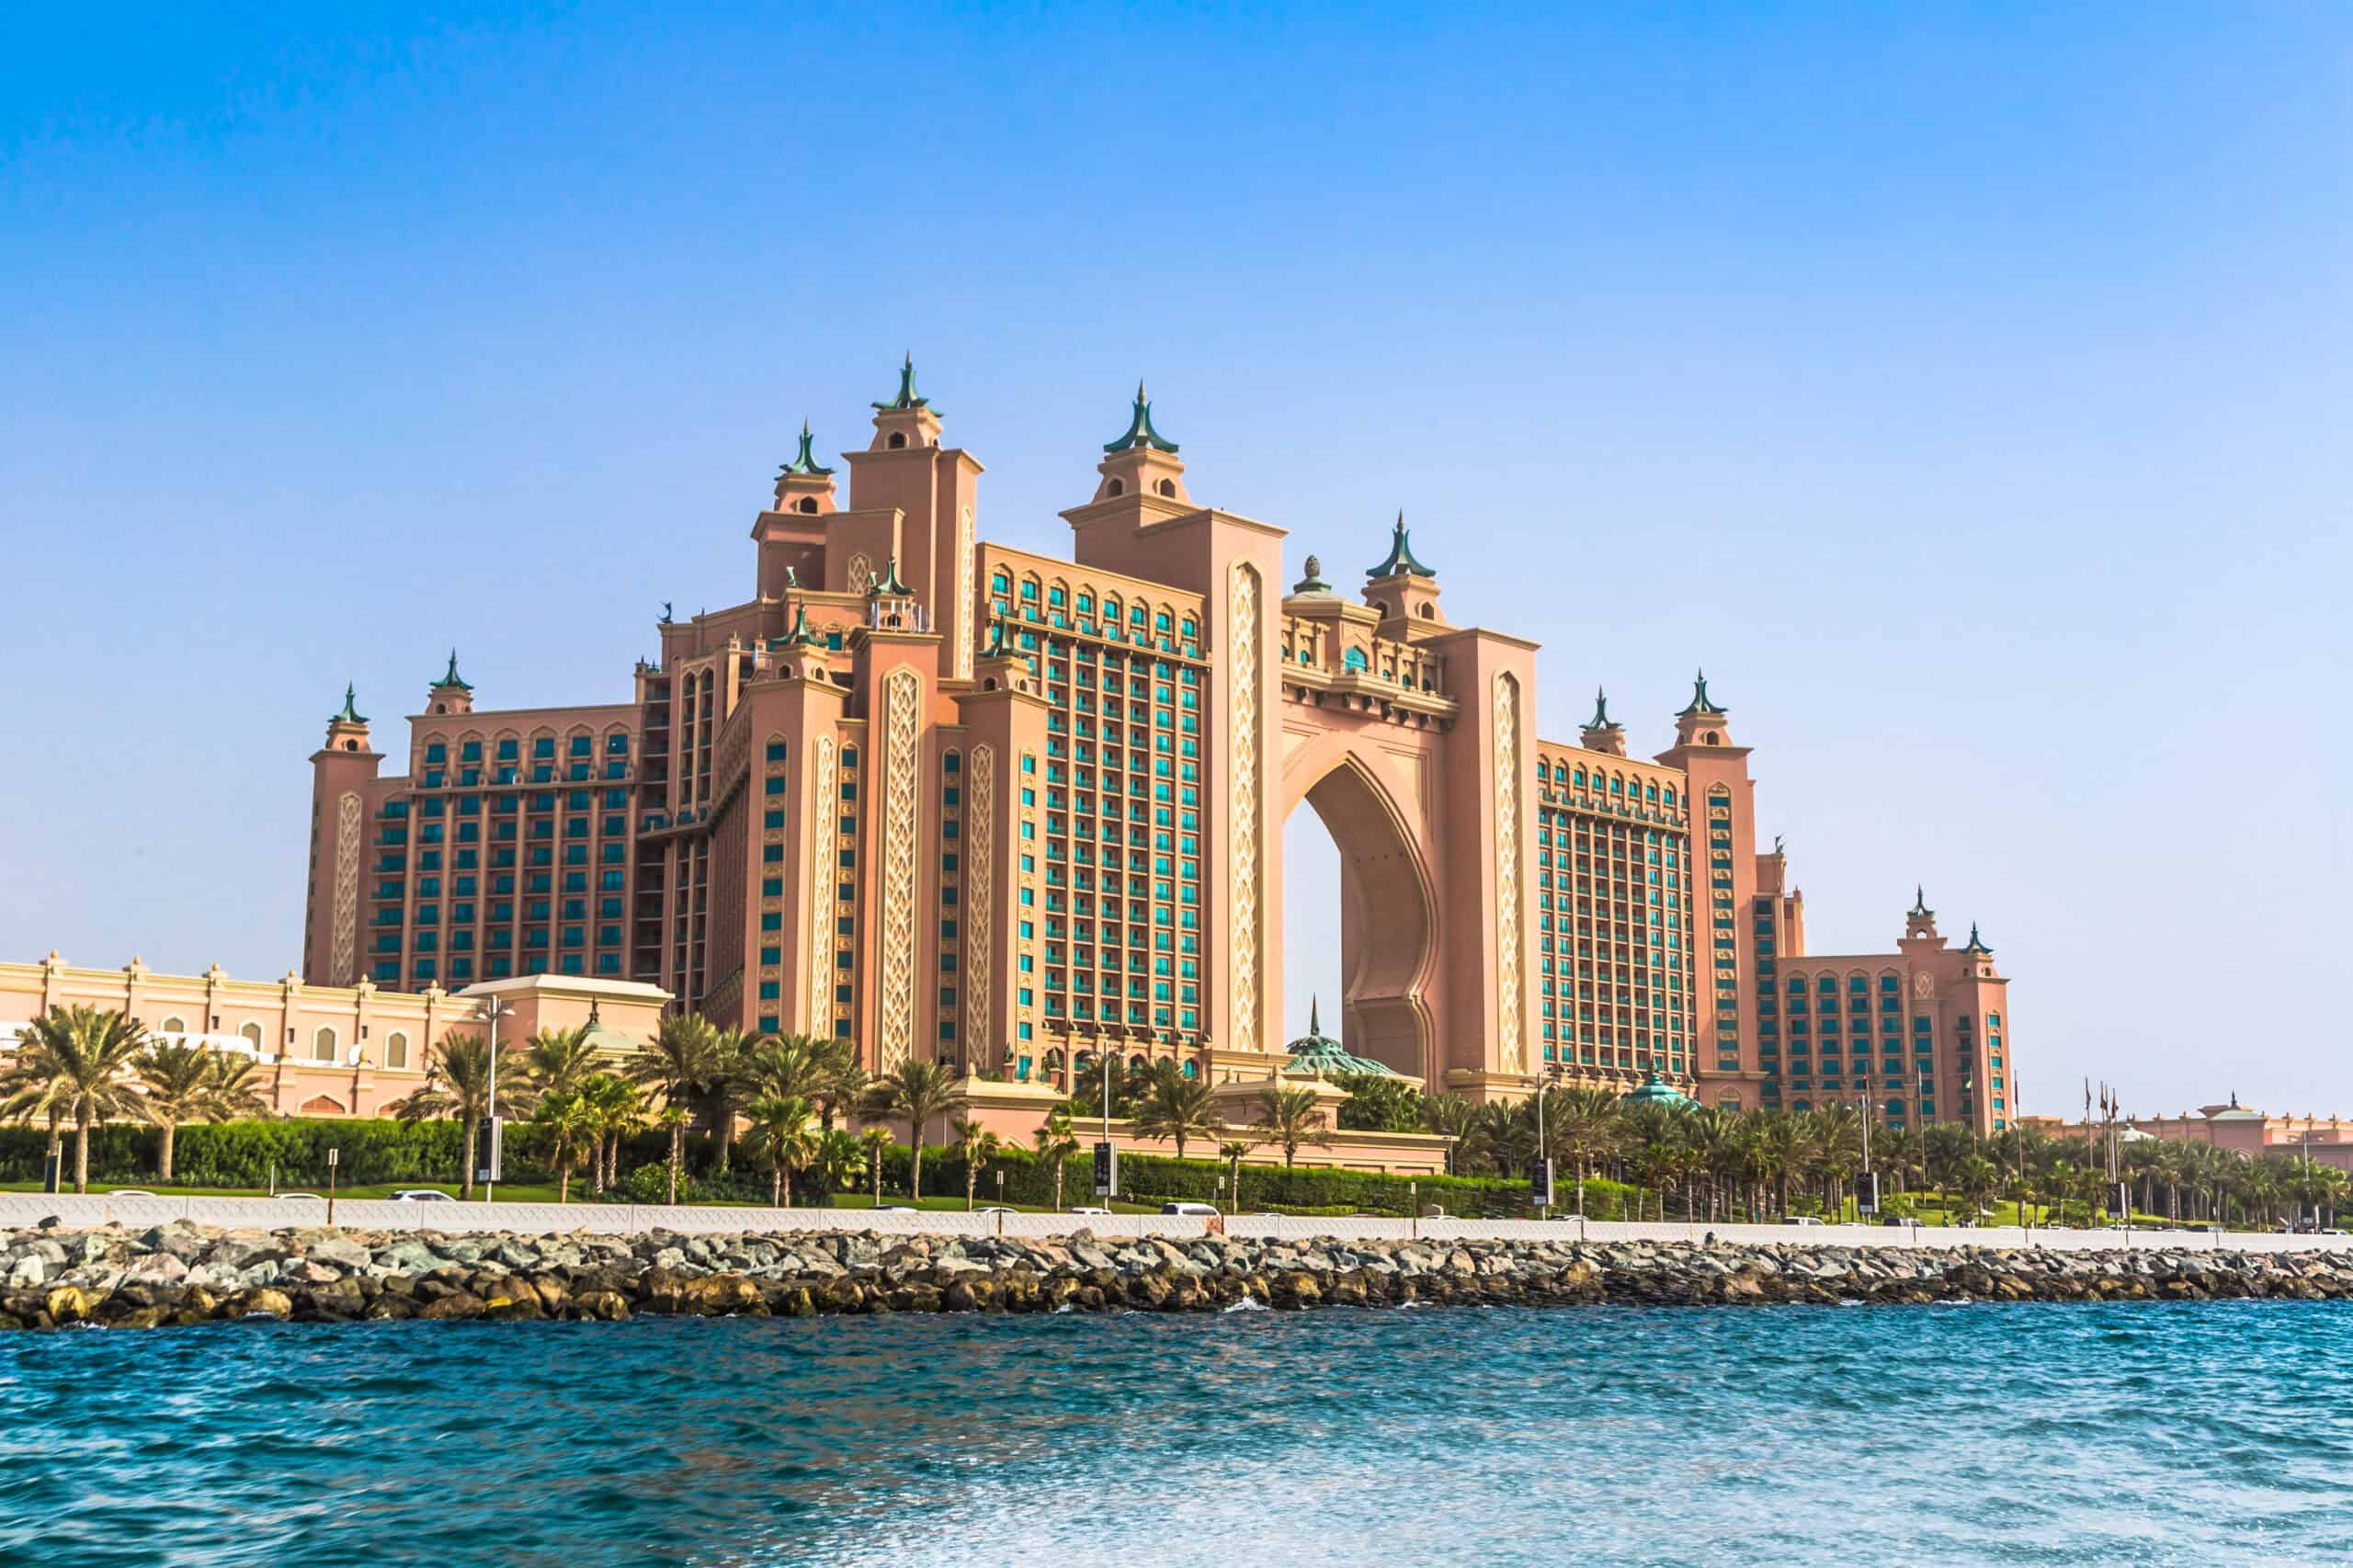 <p>Situated on the iconic Palm Jumeirah in Dubai, Atlantis The Palm is a luxurious resort renowned for its opulence and marvelous underwater suites. Opened in 2008, the resort features over 1,500 rooms, including suites with floor-to-ceiling views of the Ambassador Lagoon, home to over 65,000 marine animals. </p> <p>Guests can indulge in a variety of amenities such as the Aquaventure Waterpark, The Lost Chambers Aquarium, and world-class dining options. Inspired by the myth of Atlantis, this resort offers an extravagant and immersive experience, making it one of the most unforgettable destinations in the world.</p>